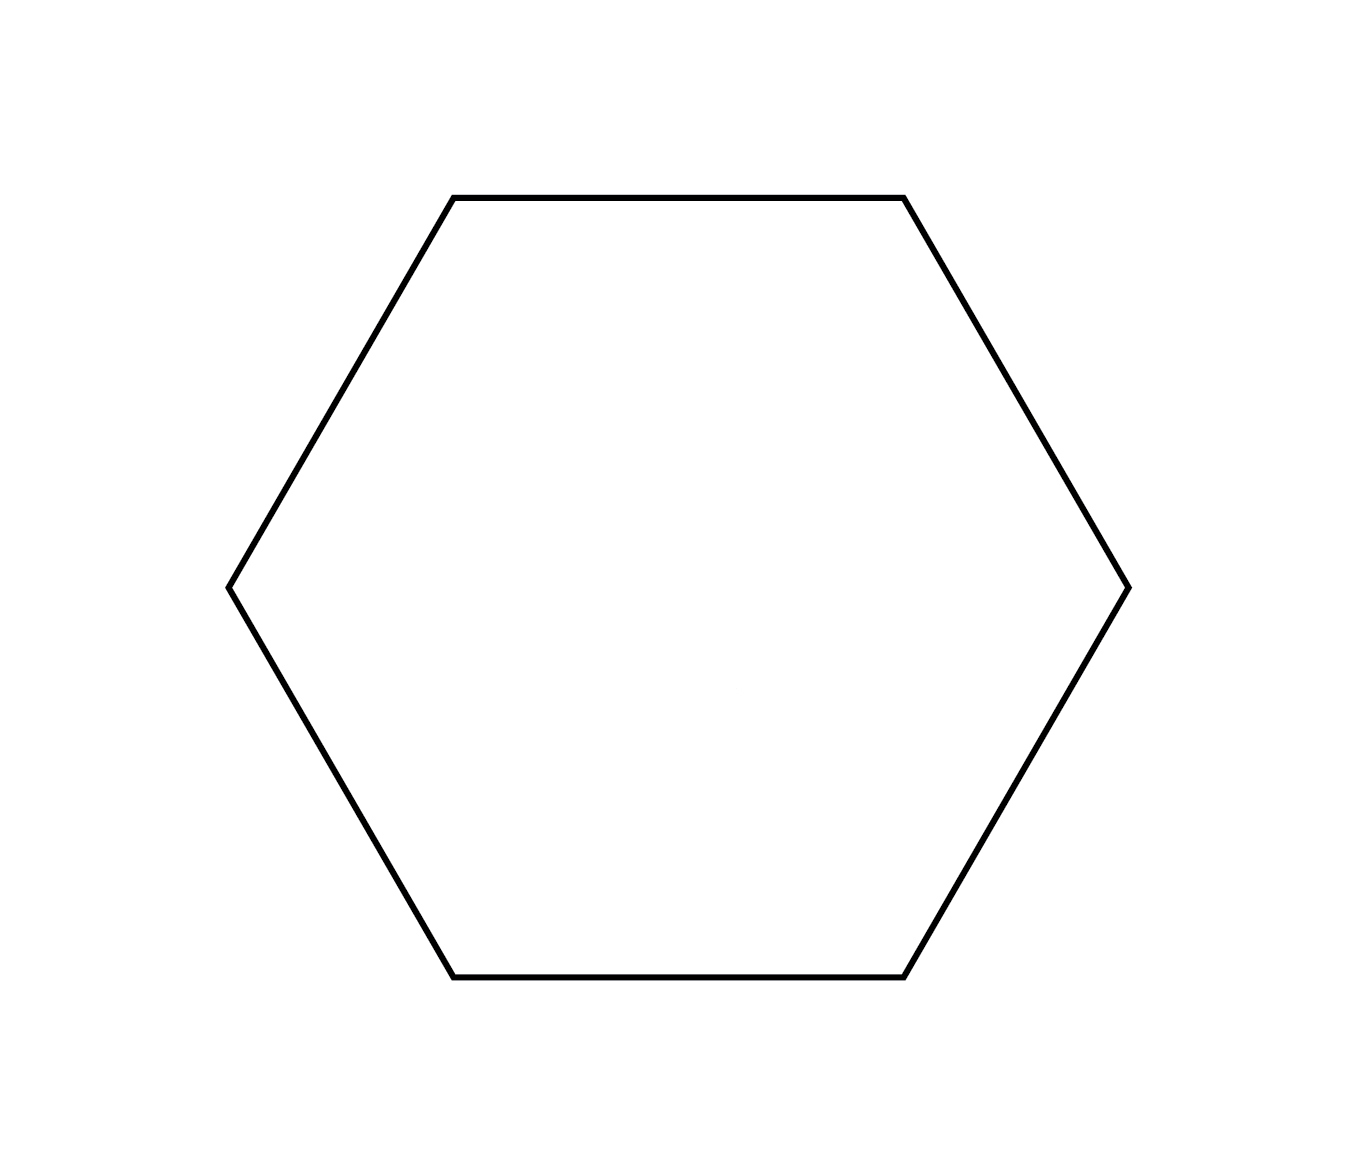 Hexagon Outline Images & Pictures - Becuo